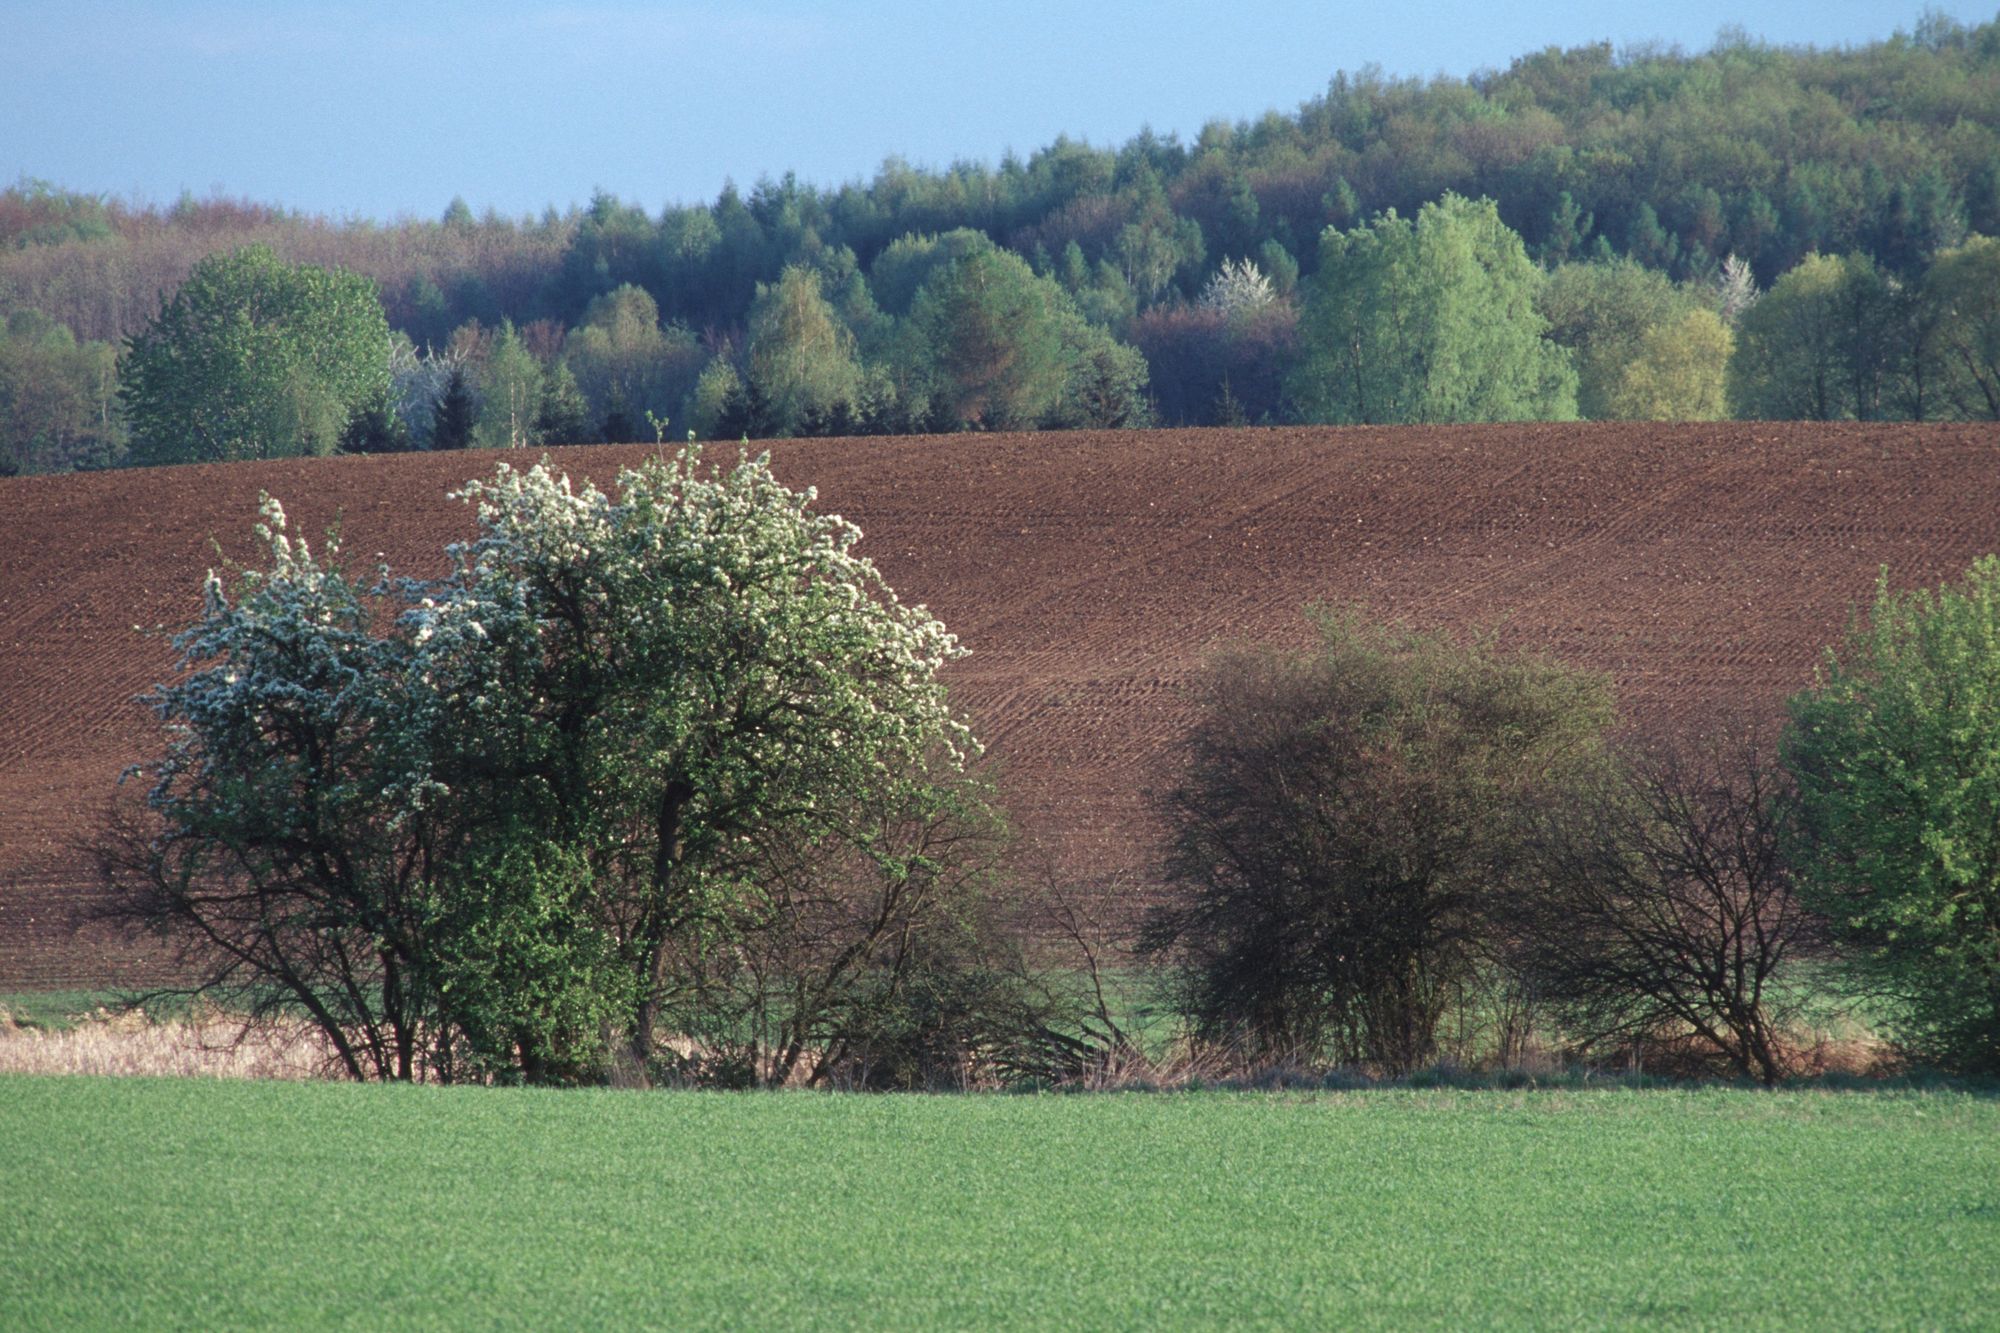 Row of trees between two agricultural fields